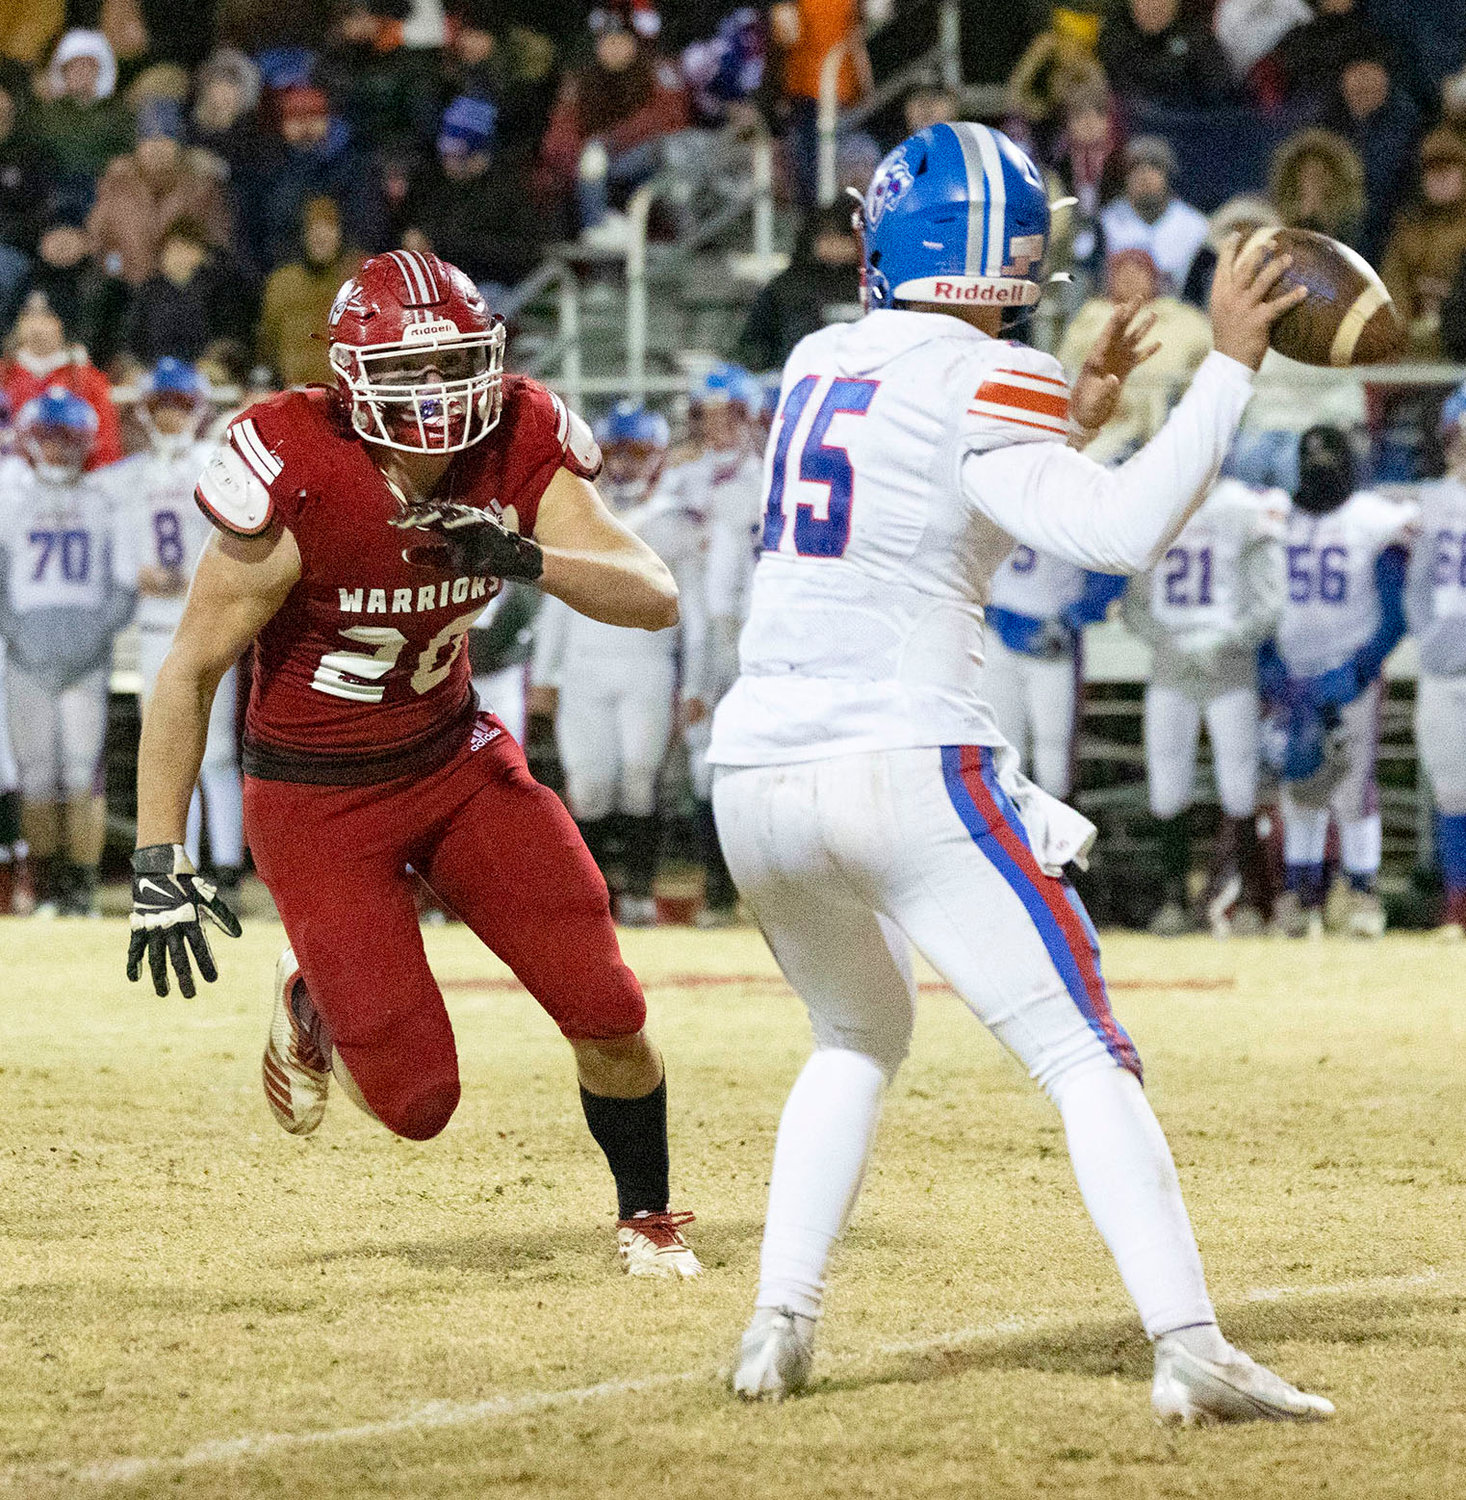 Washington senior Hayden Milner pressures the Oklahoma Christian School quarterback last Friday night during the Warriors’ 18-11 win. Washington travels to McAlester this Friday for a quarterfinal showdown against Idabel at 7 p.m.